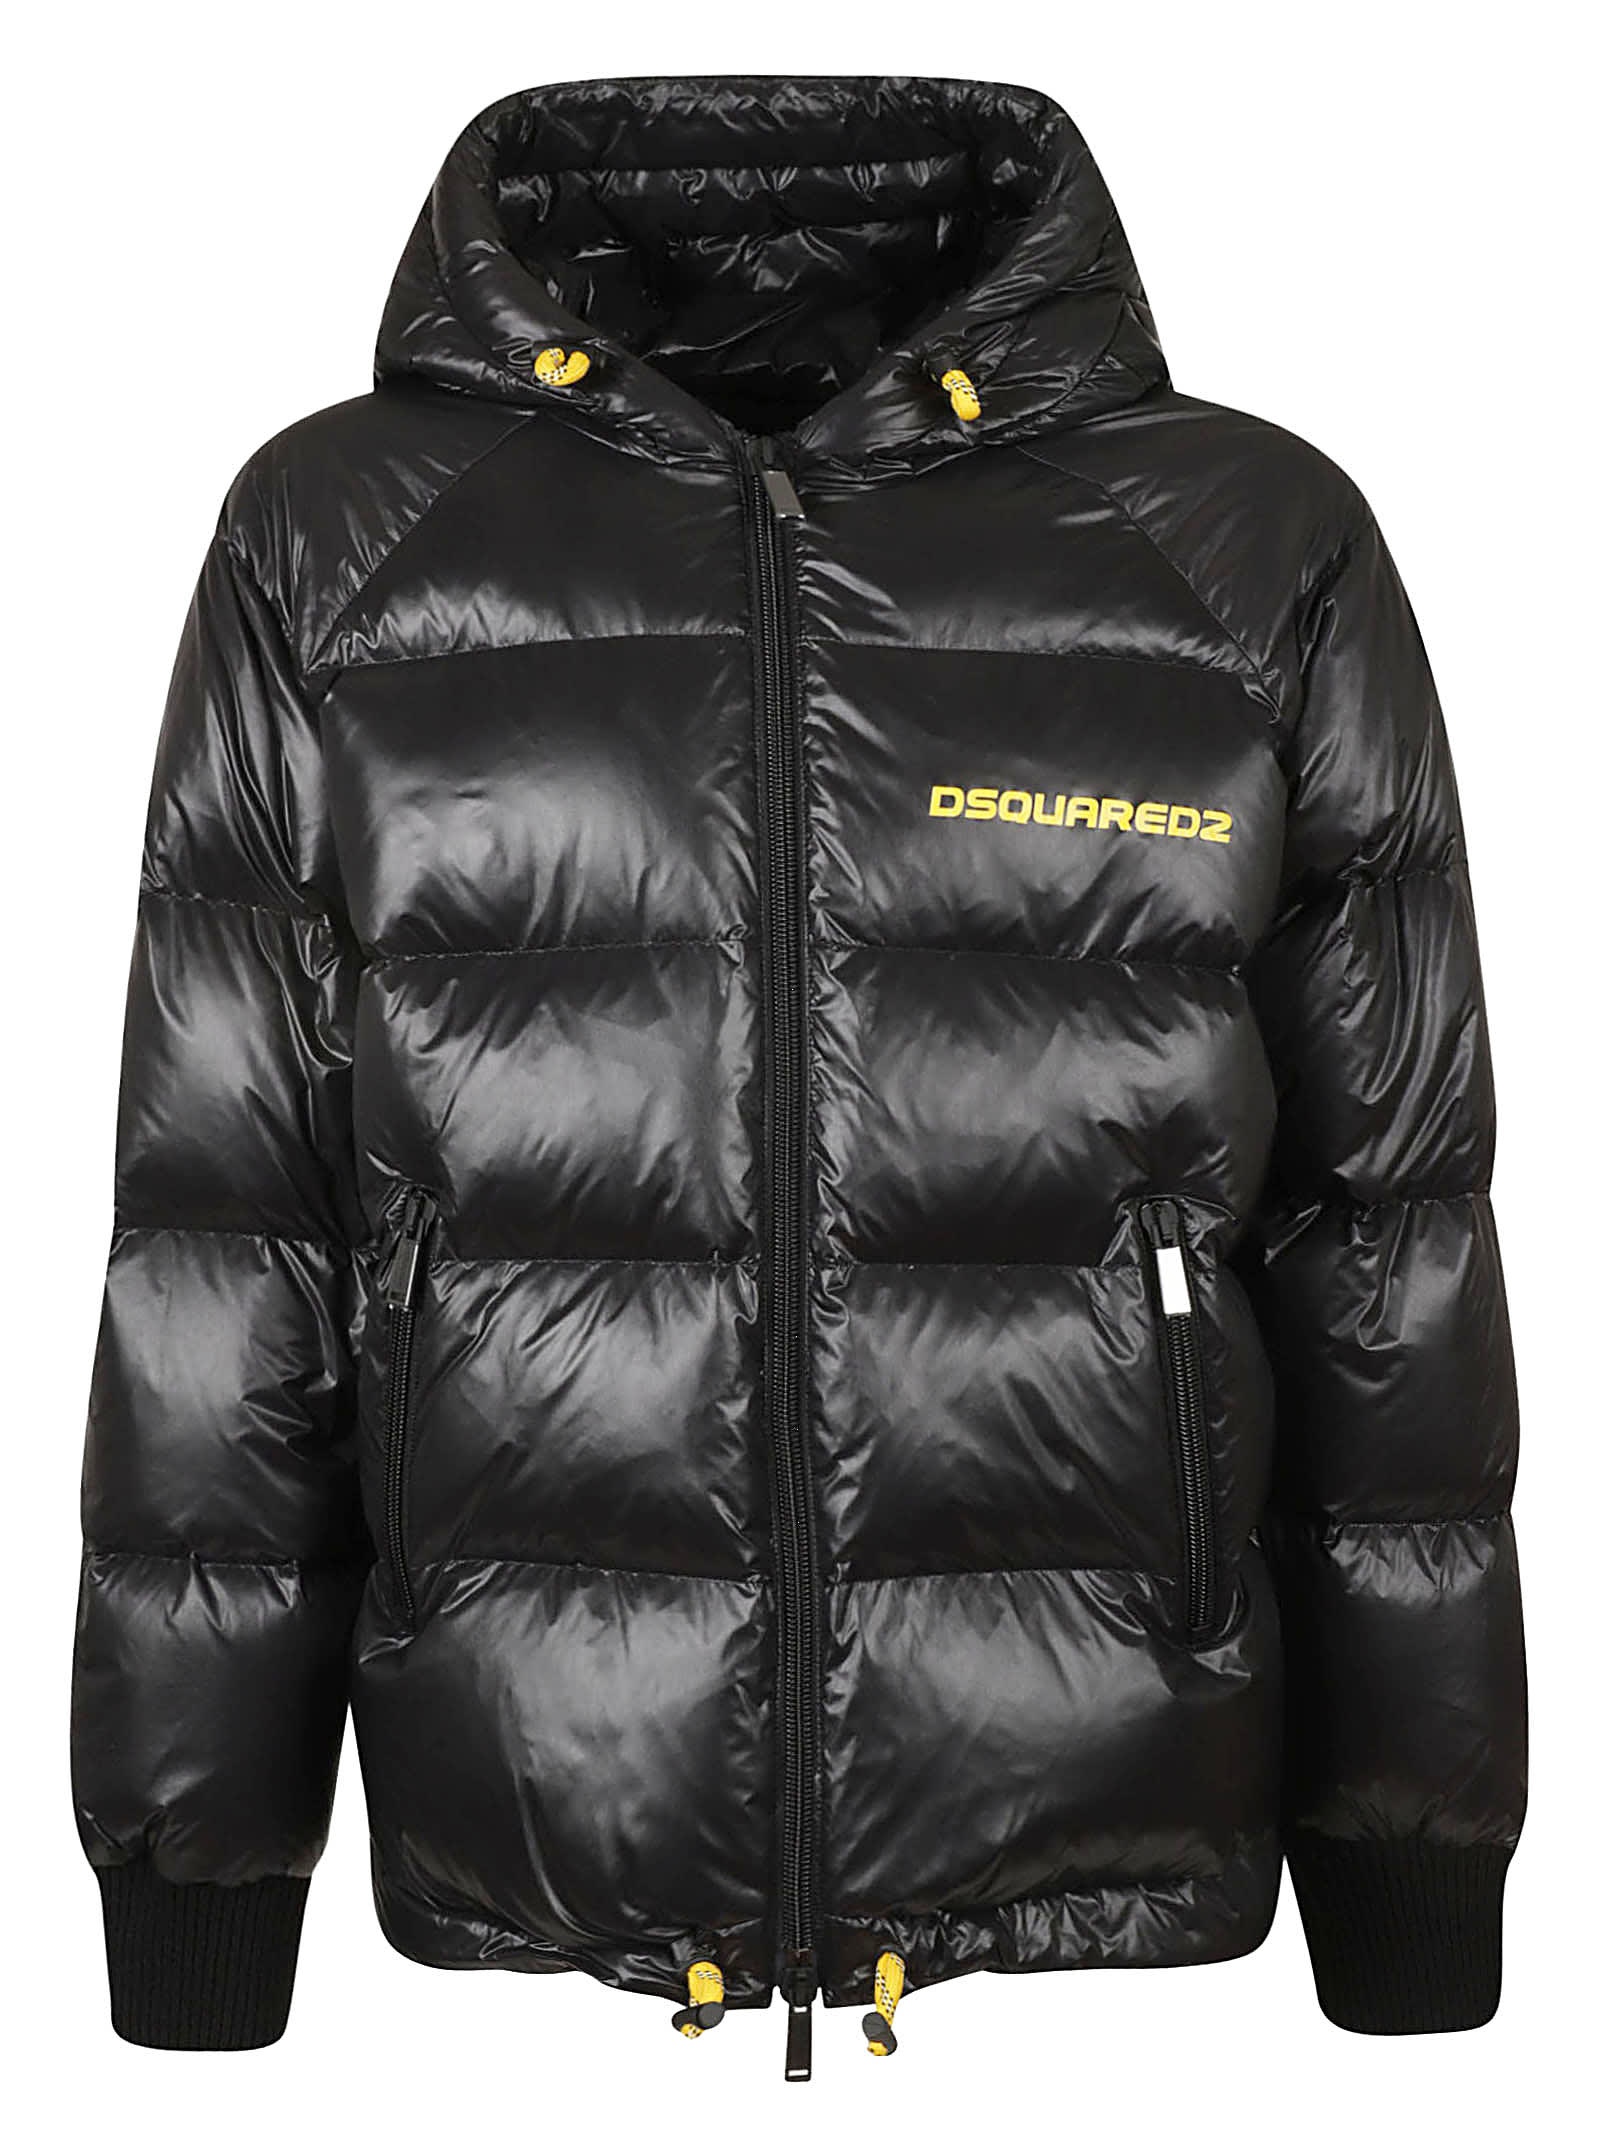 Dsquared2 Crest Puffer Jacket